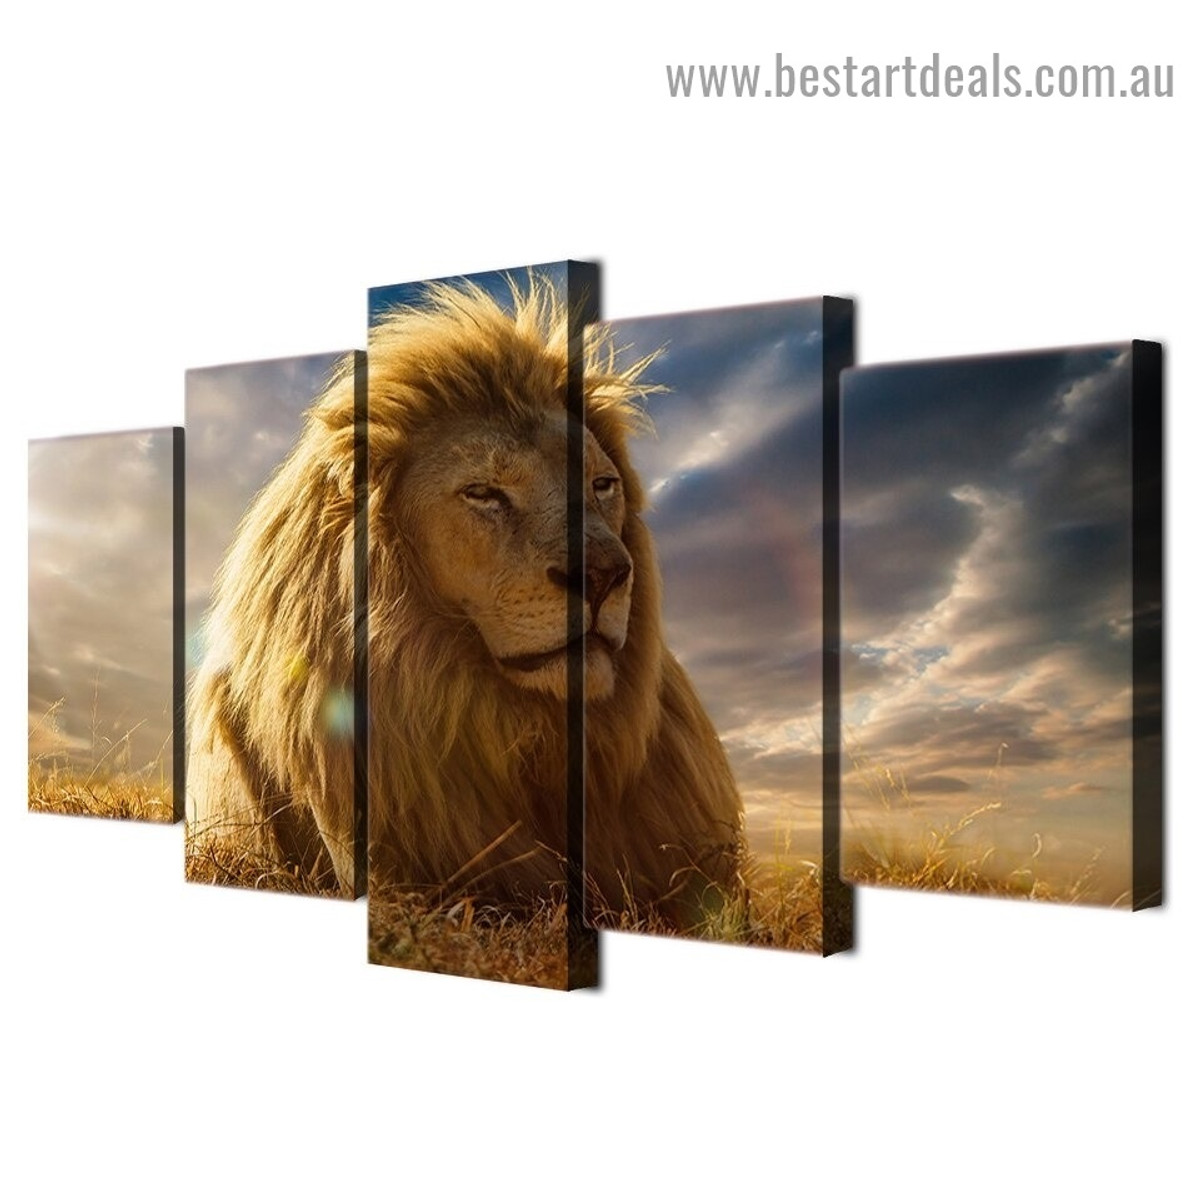 Lion King Animal Landscape Modern Artwork Photo Canvas Print for Room Wall Adornment